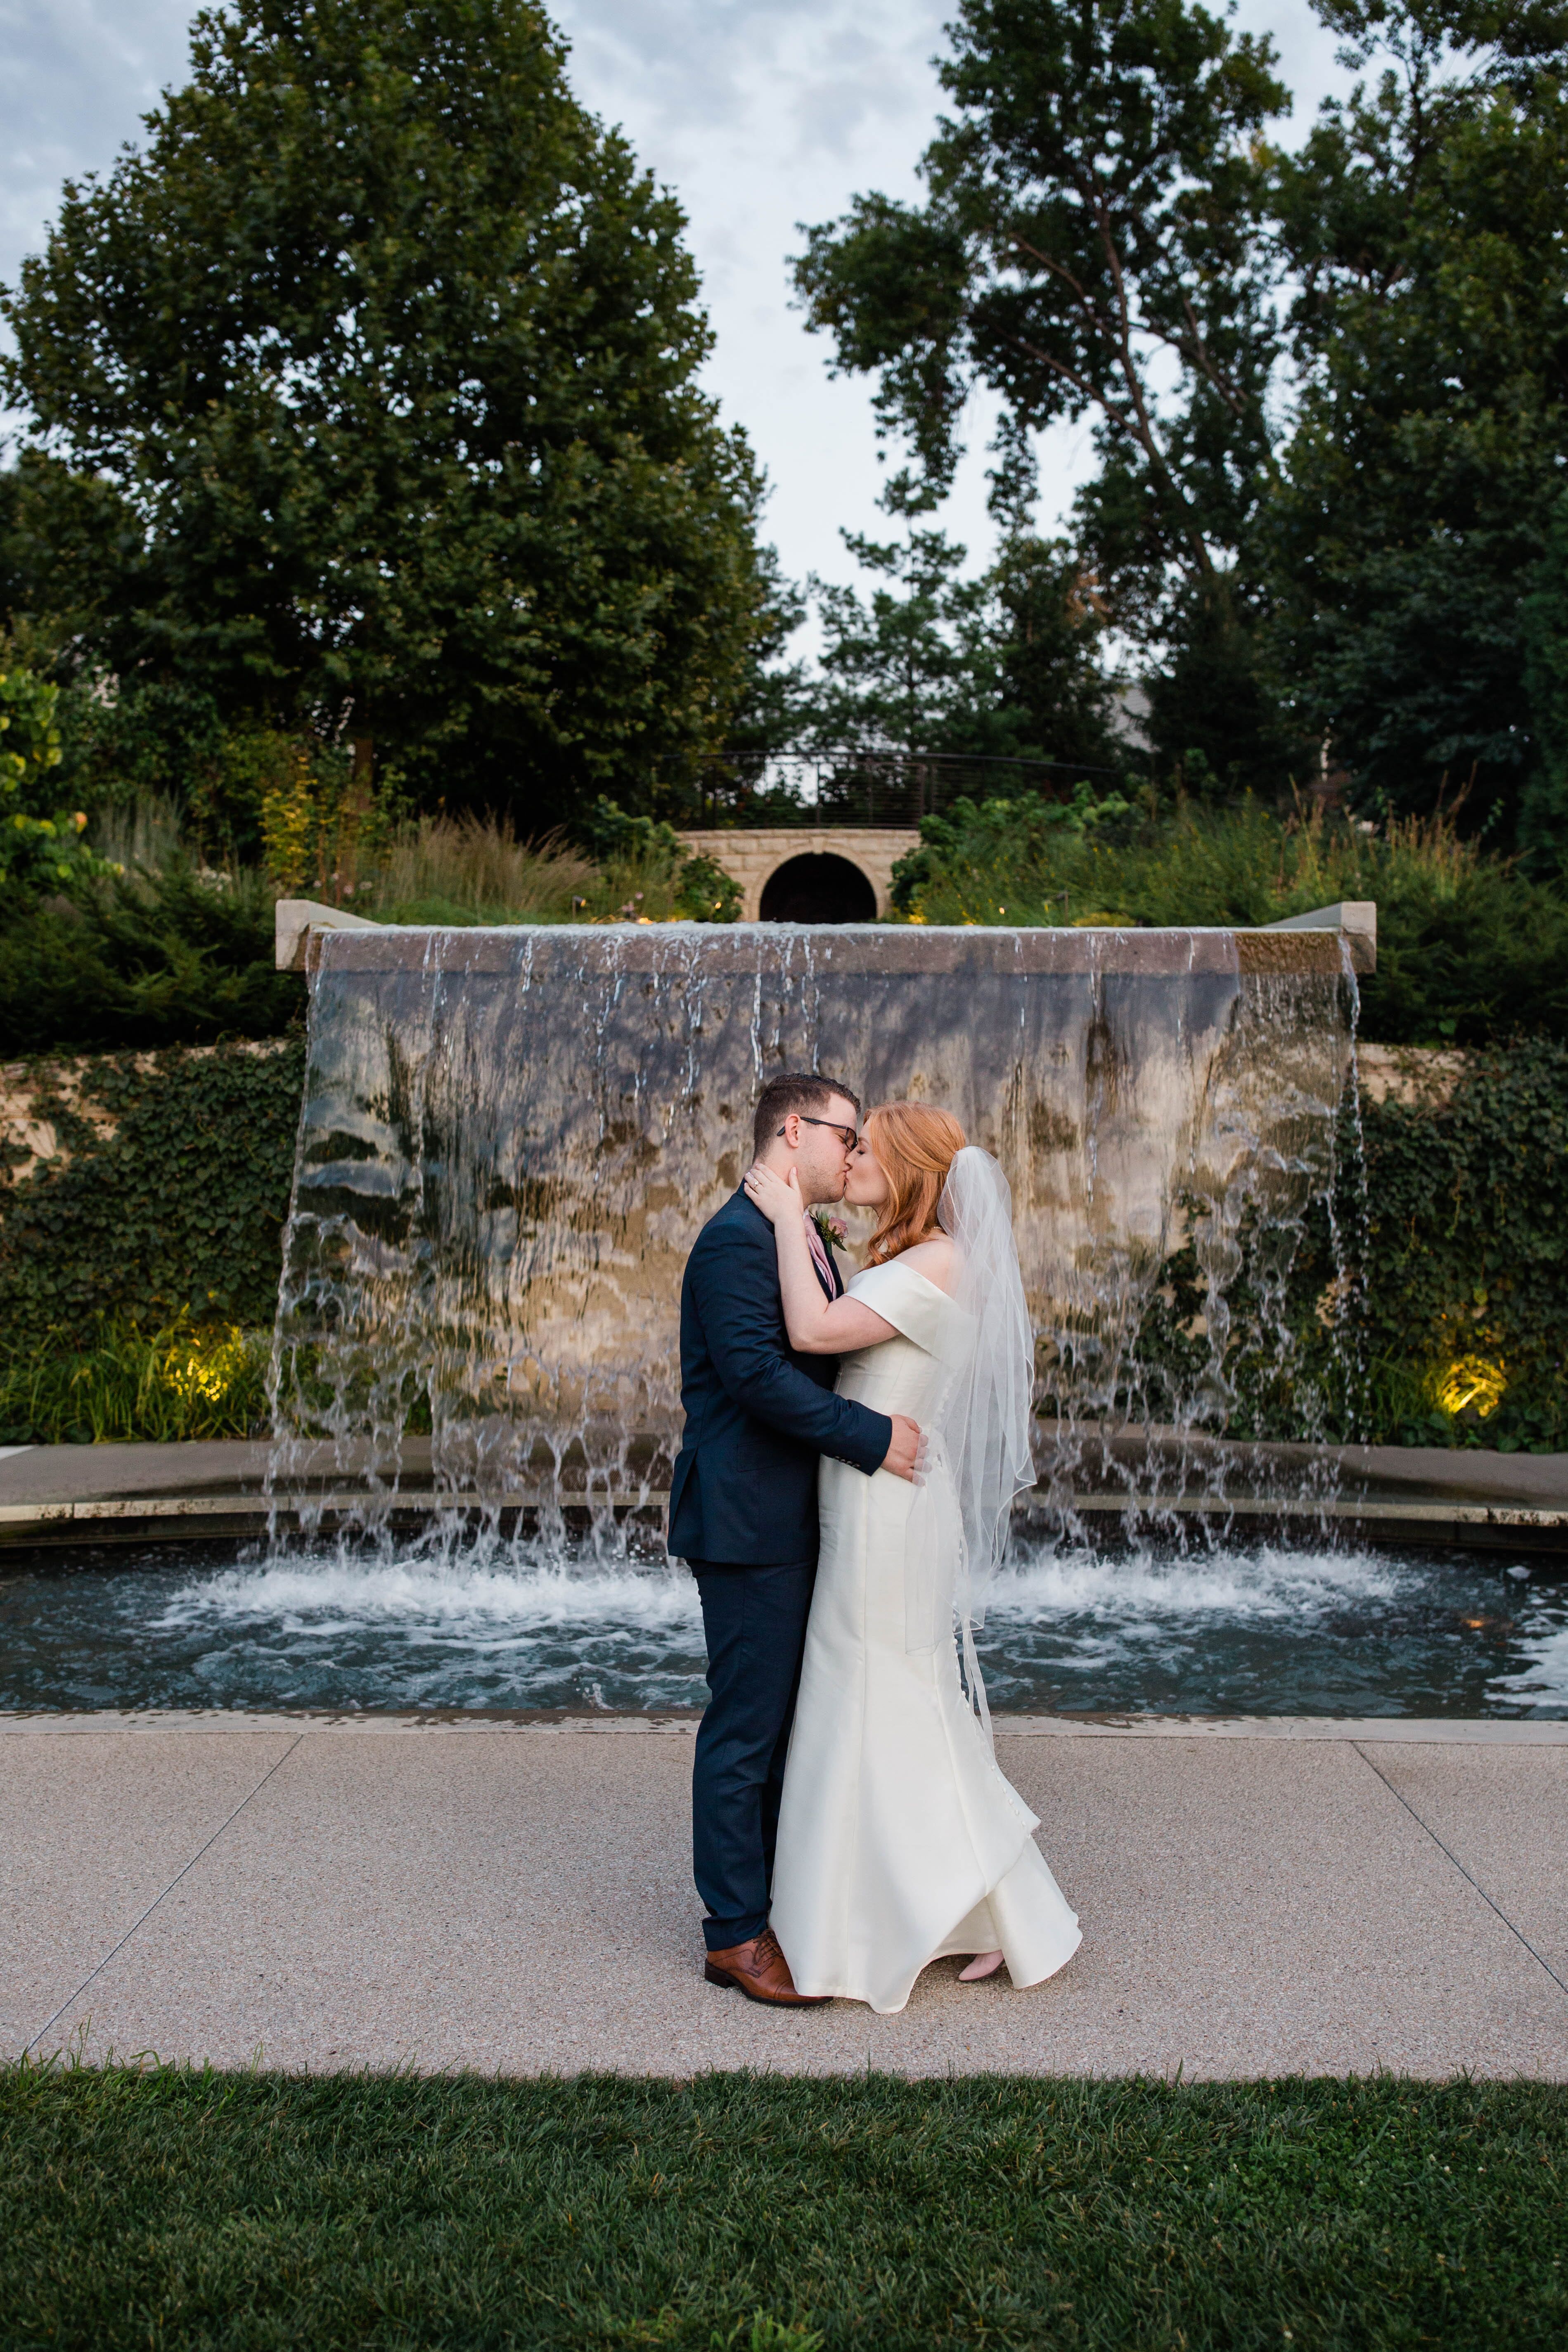 Greater Des Moines Botanical Garden Reception Venues - The Knot